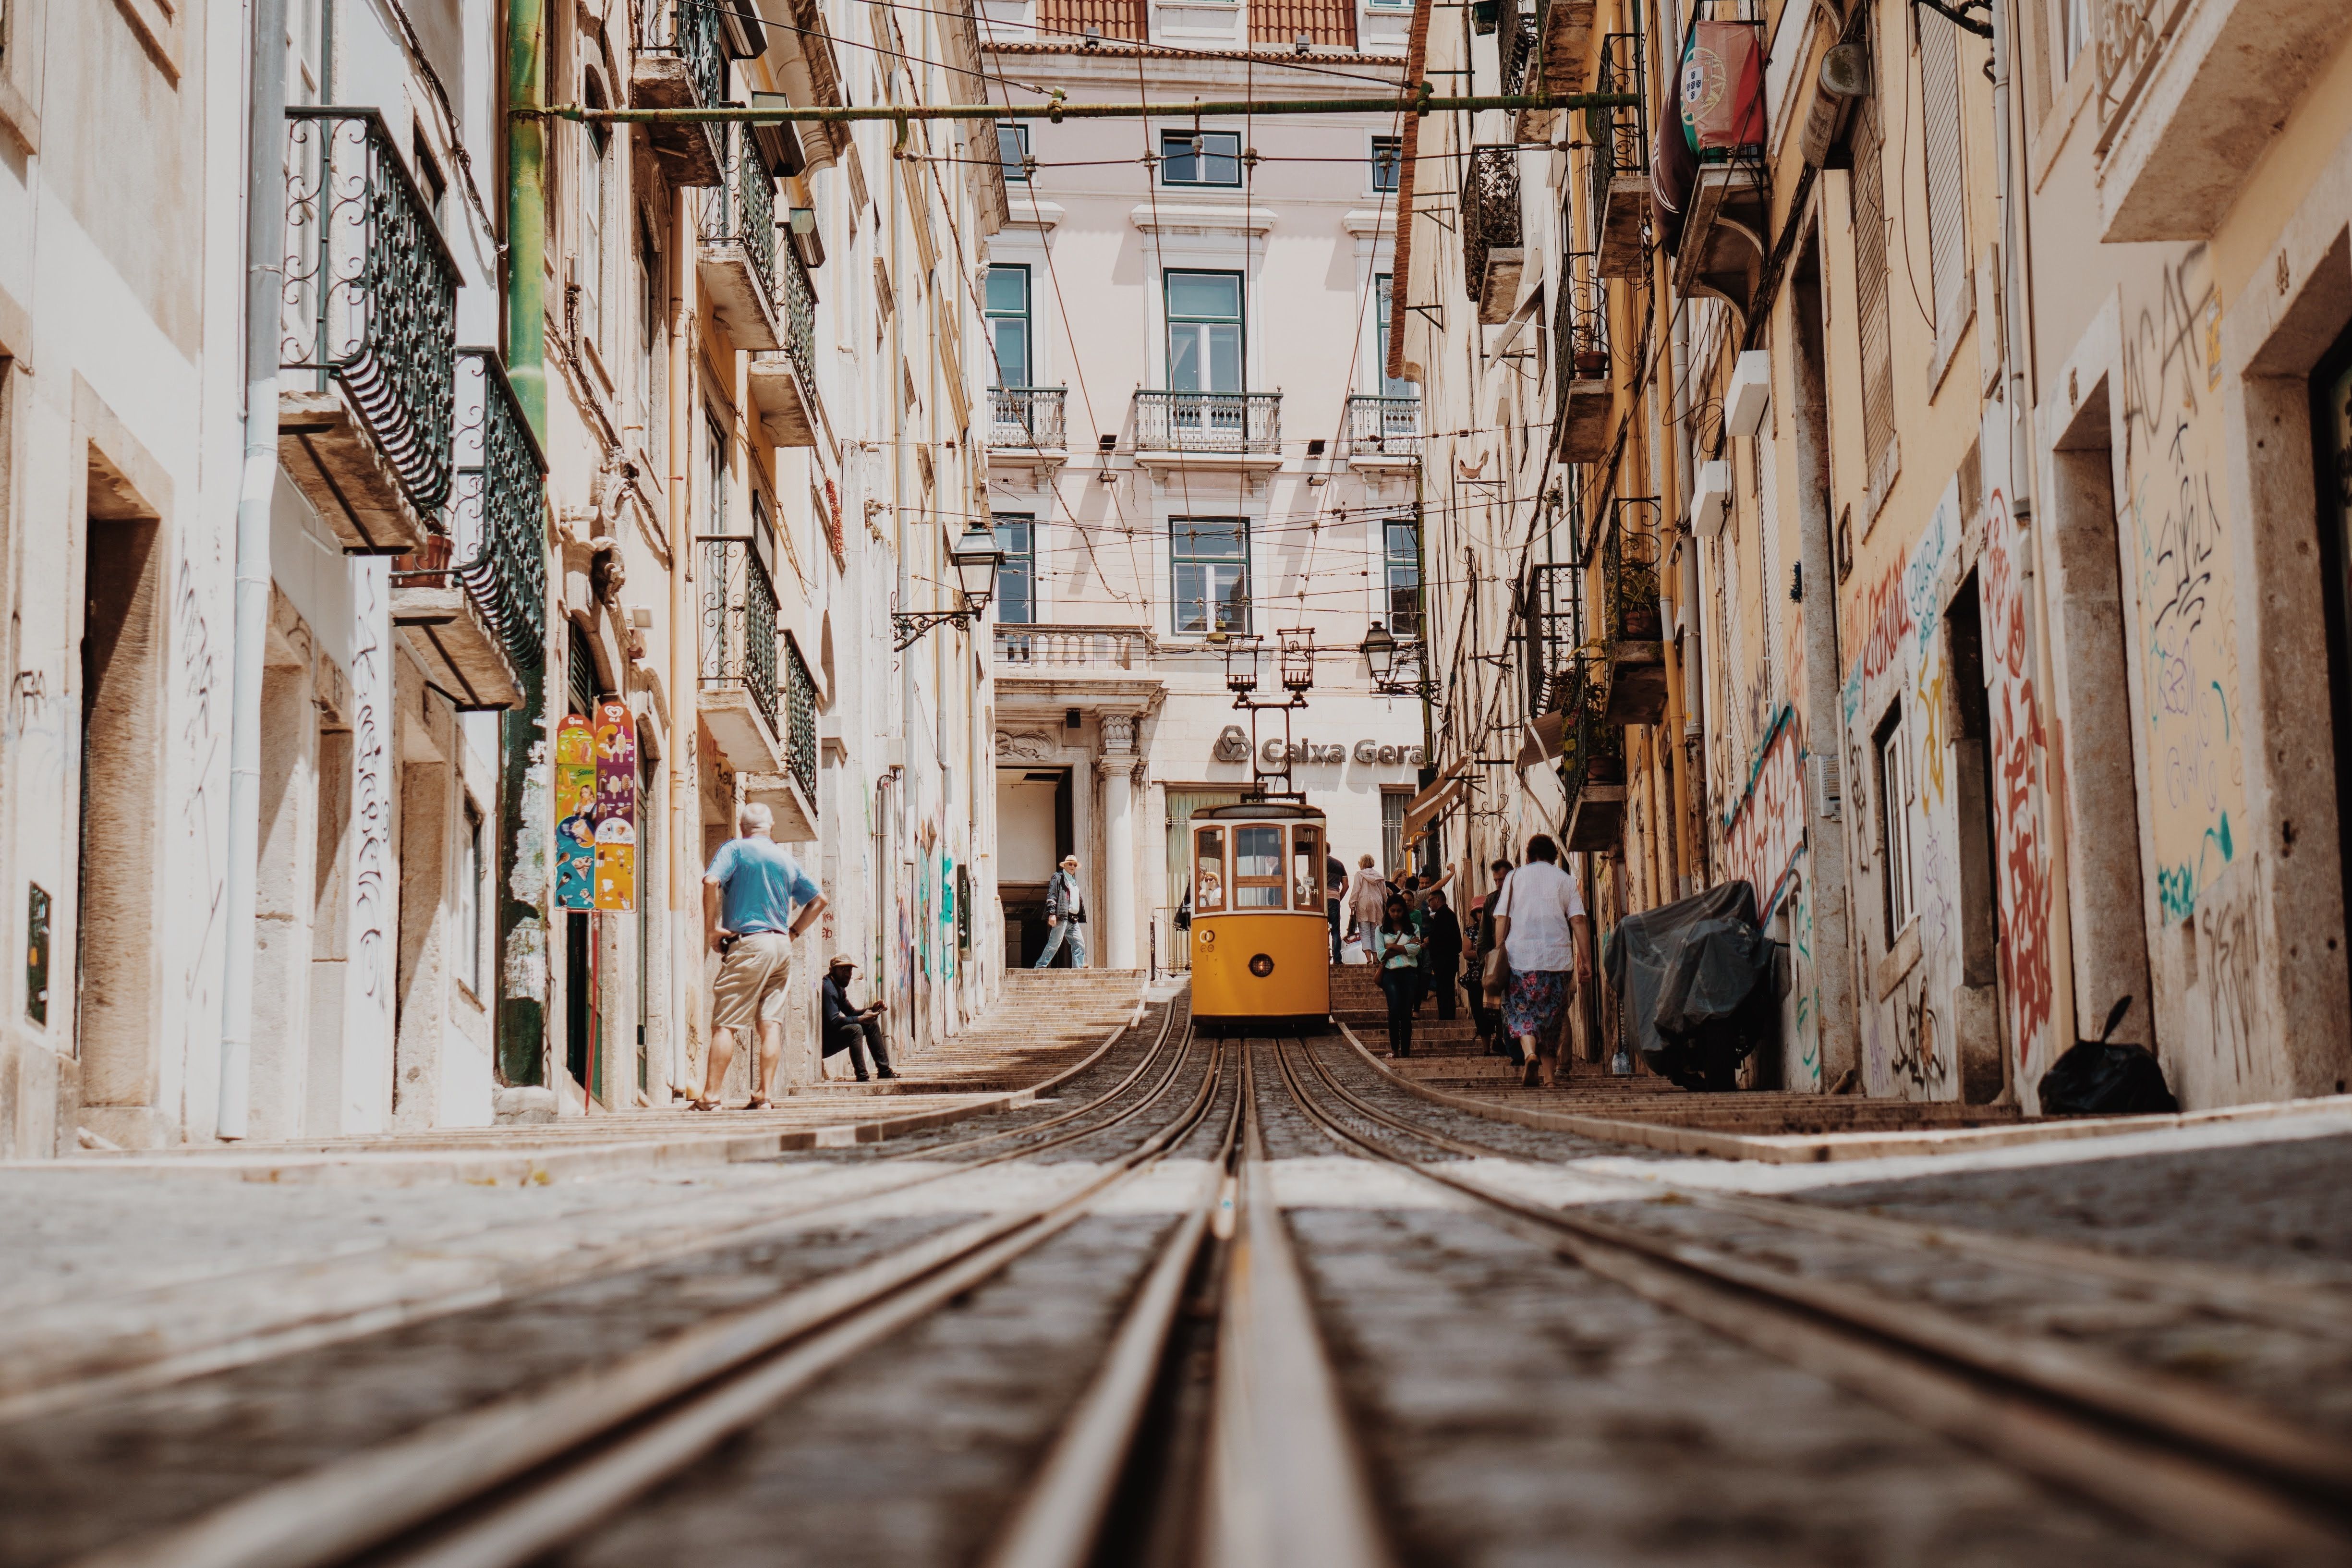 Yellow tram on the streets of Lisbon, Portugal.